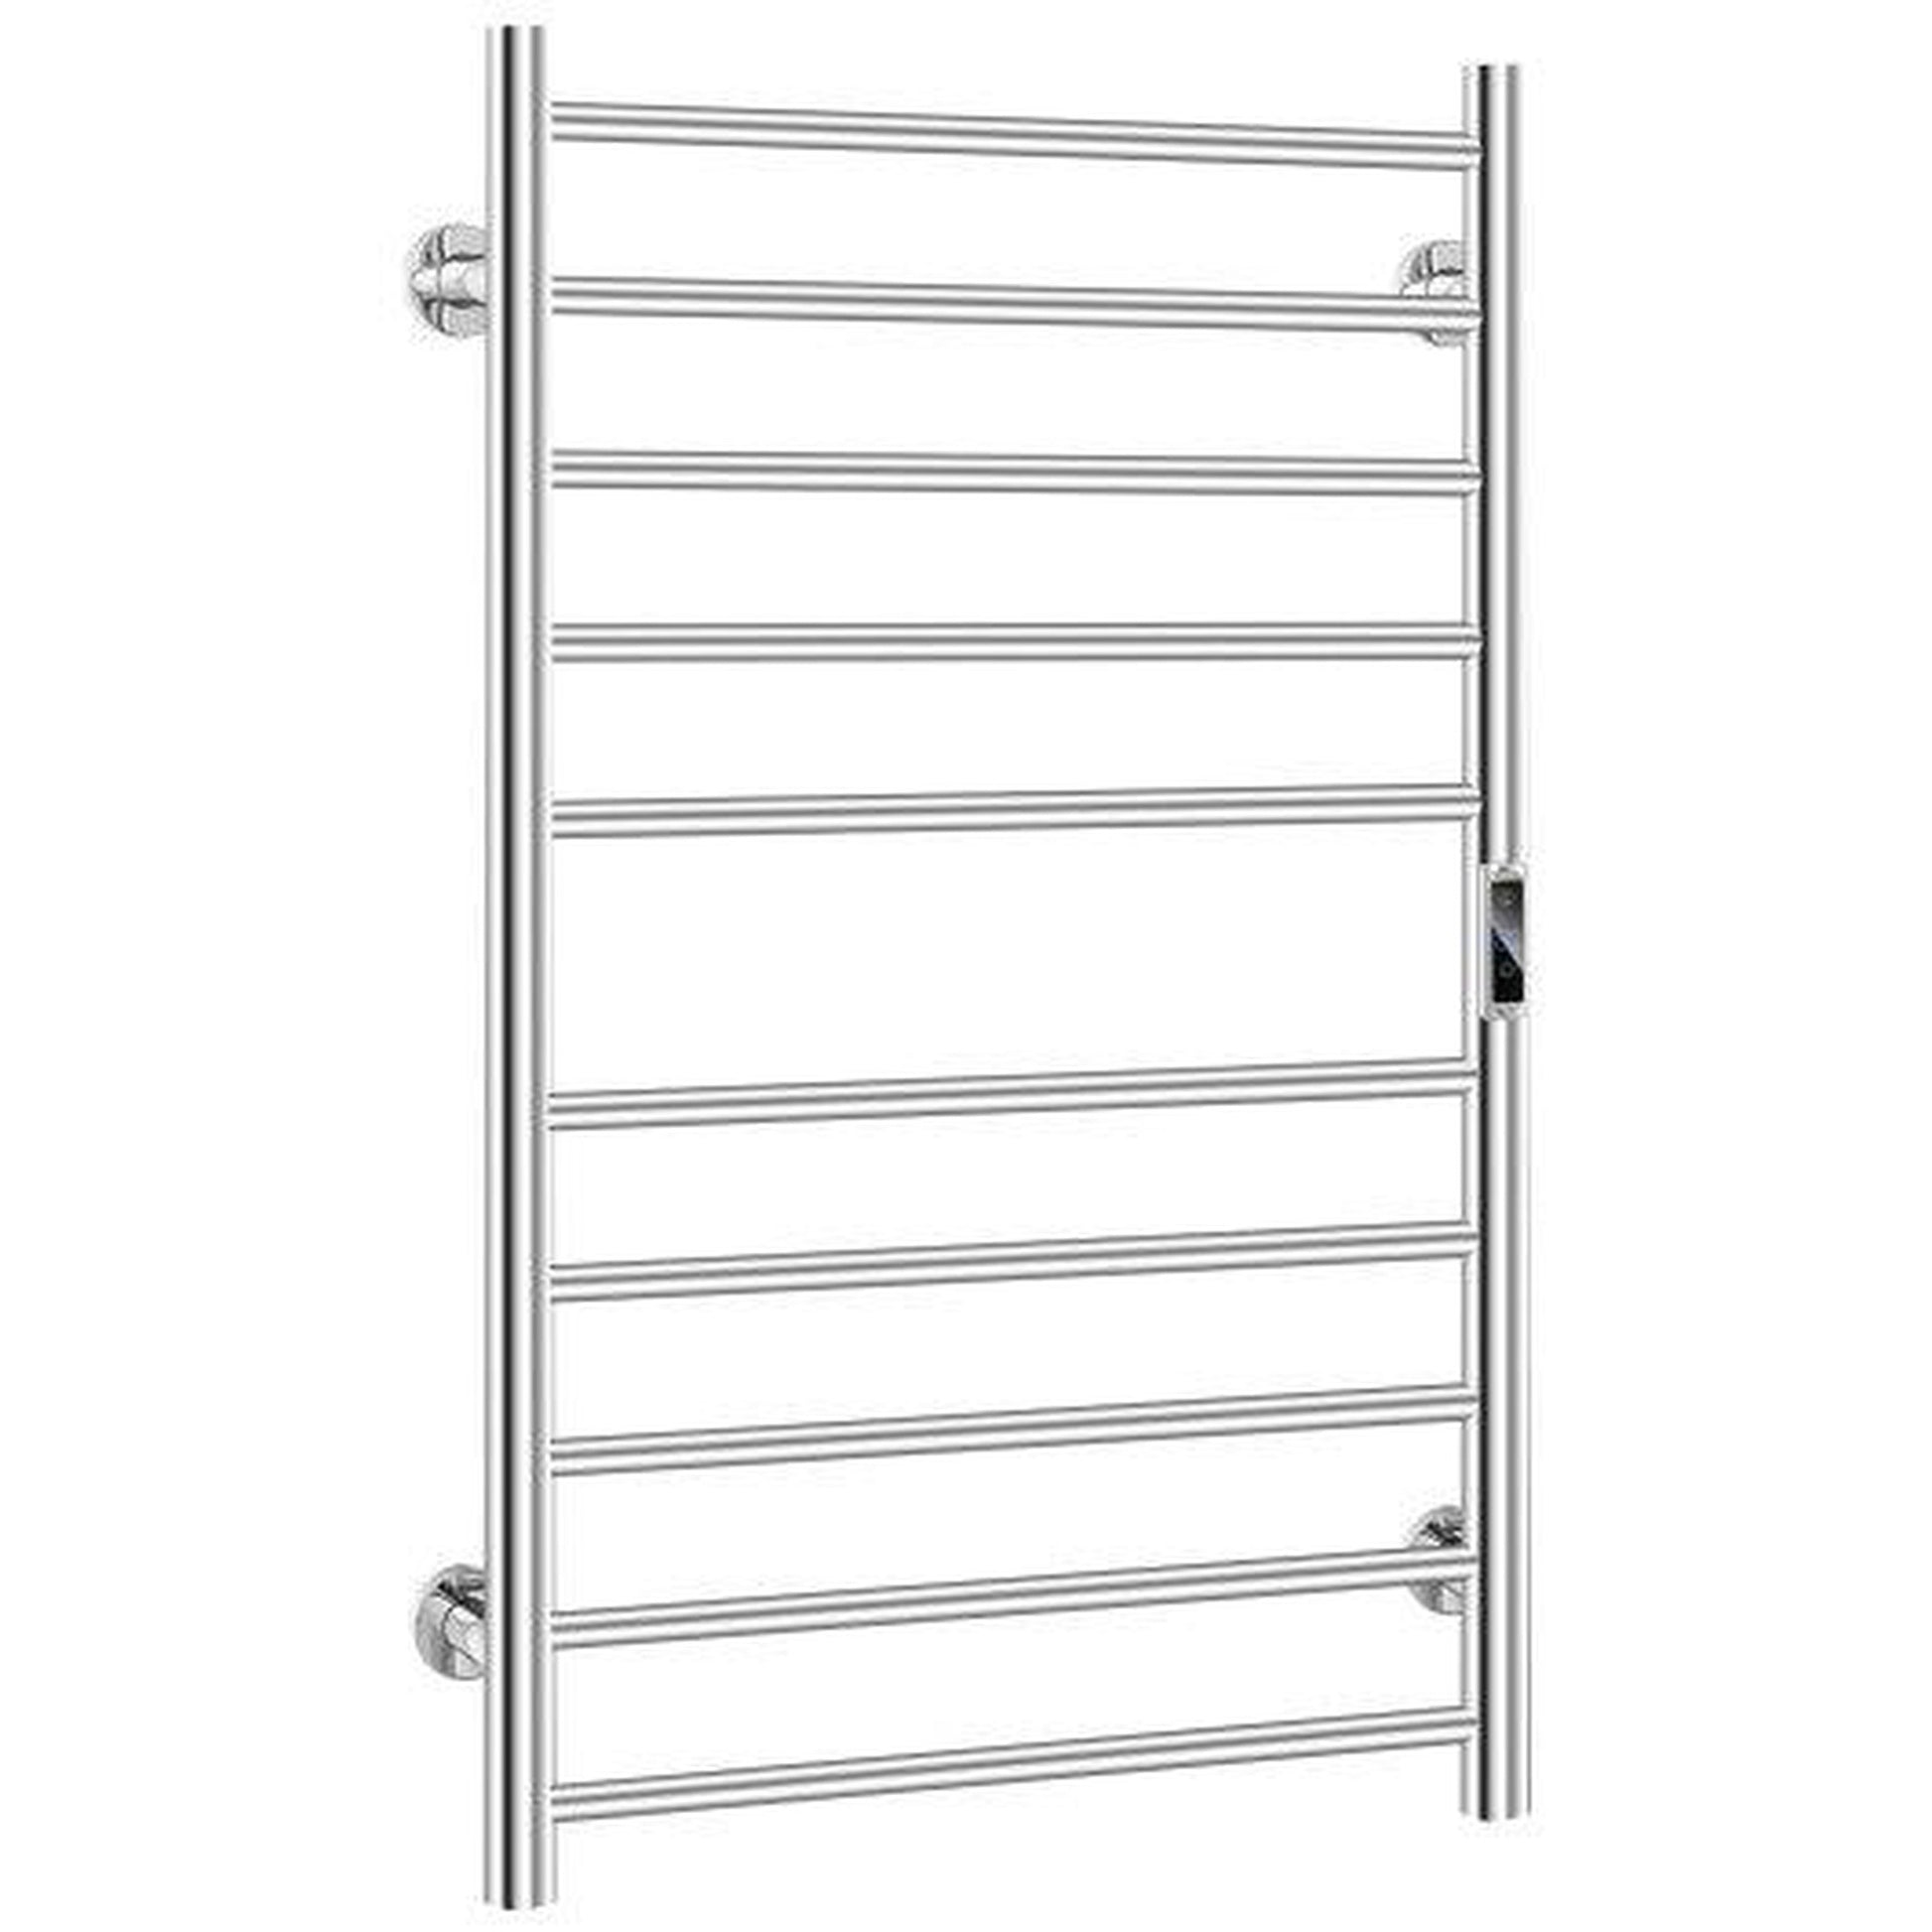 Costway Silver 10-bar Heated Wall Mounted Towel Warmer with Timer